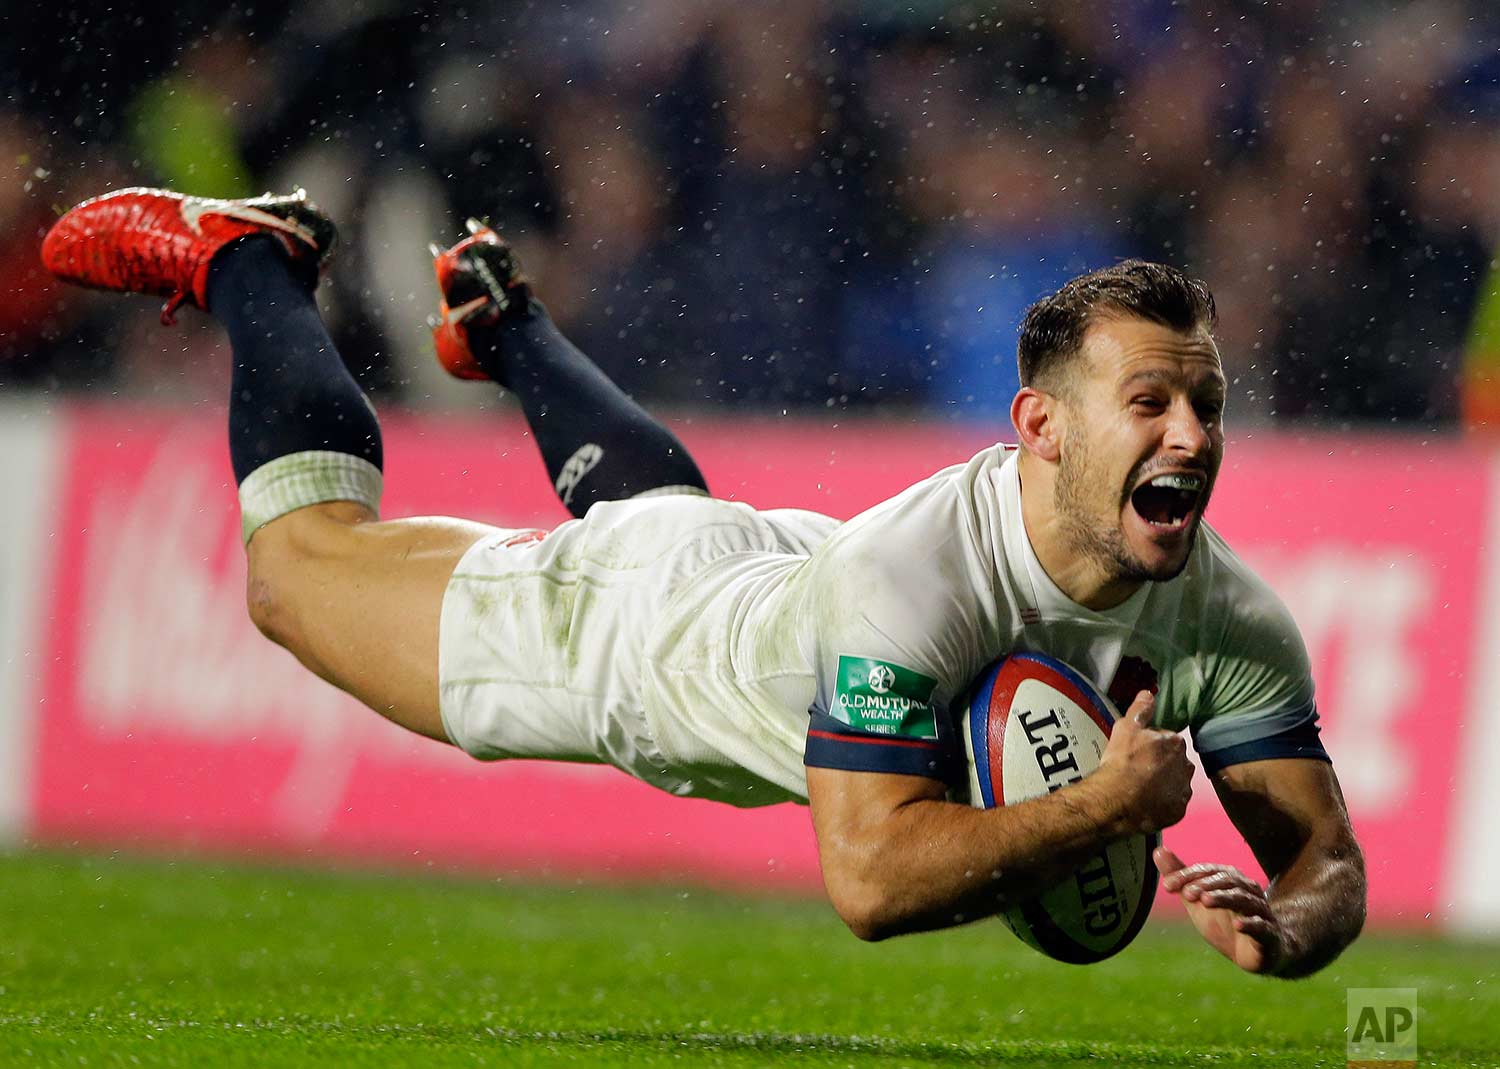  In this Saturday, Nov. 18, 2017 photo, England's Danny Care smiles as he goes over the line for England's fourth try during their rugby union international match between England and Australia at Twickenham stadium in London. (AP Photo/Alastair Grant